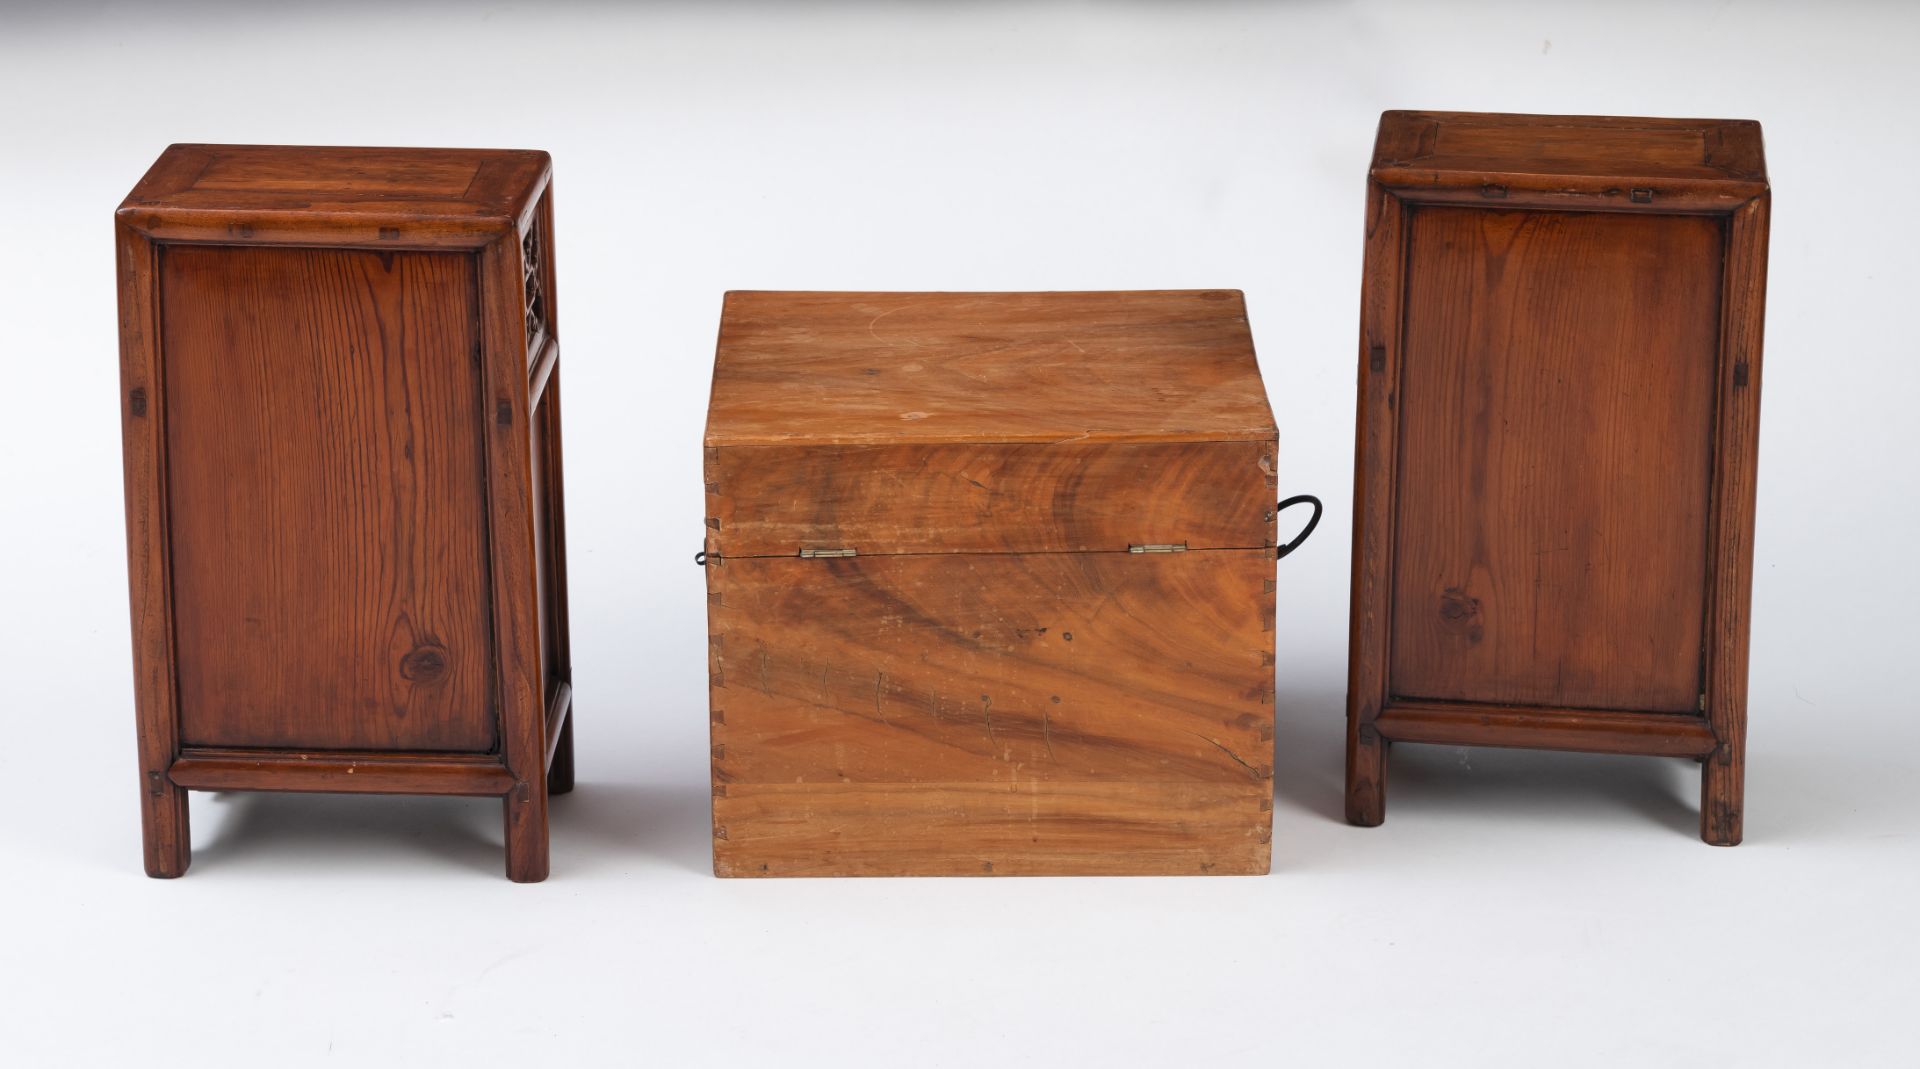 A PAIR OF SMALL CABINETS WITH DRAWERS AND A CHEST - Image 4 of 5